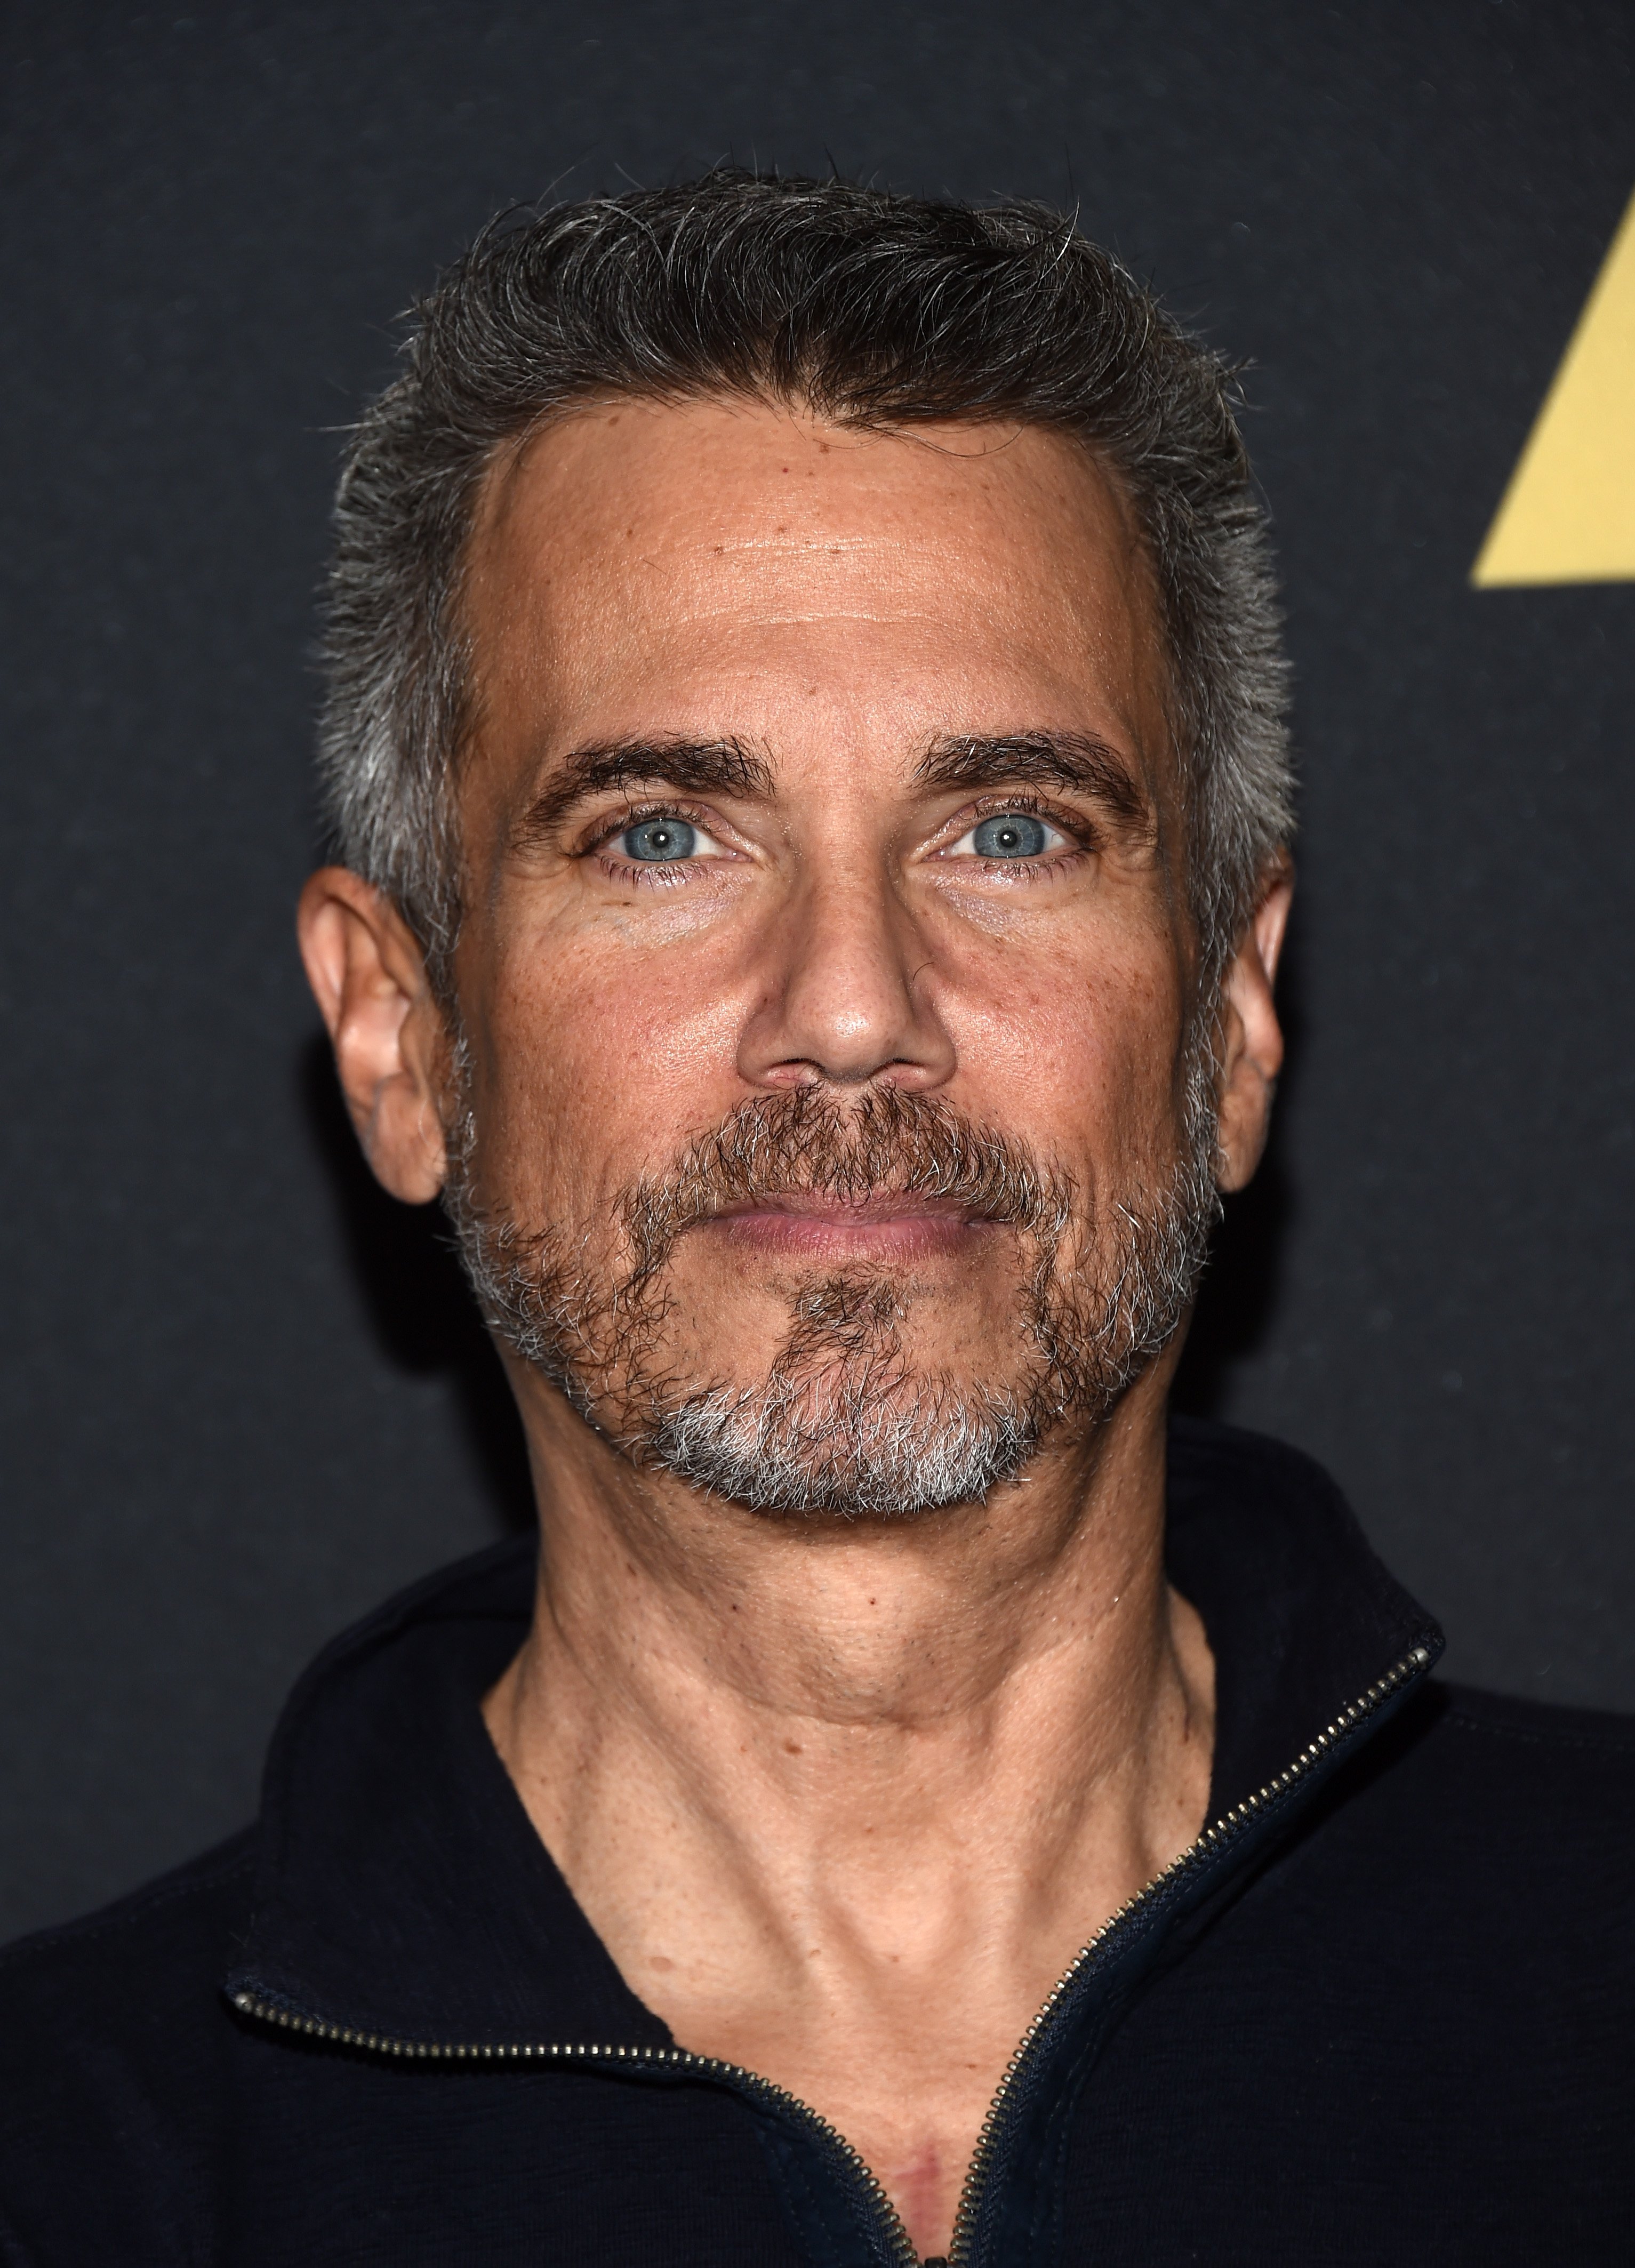 Robby Benson arrives at the Academy's 25th Anniversary Screening of "Beauty And the Beast": A Marc Davis Celebration of Animation at the Samuel Goldwyn Theater on May 9, 2016 in Beverly Hills, California. | Source: Getty Images